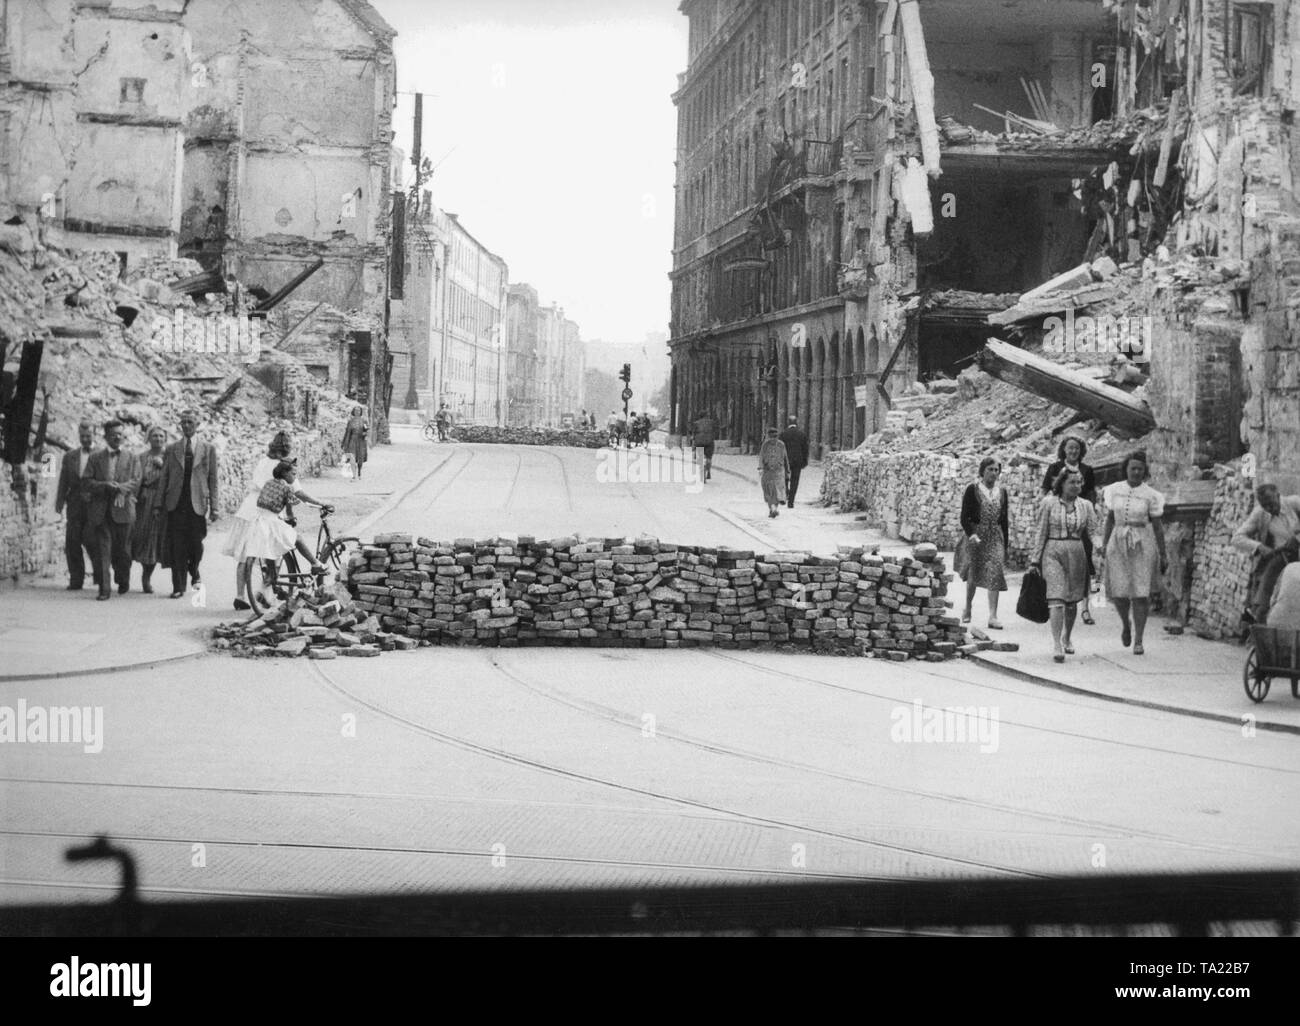 World War II - ruined cities: postwar period in Munich in 1945, Theatinerstrasse corner Perusastrasse with tank traps. View from here on the Maximilianstrasse. Left in the middle you can see a part of the destroyed National Theatre, at right is now the famous Franziskaner, left at the corner the Stoeckelhaus. Stock Photo